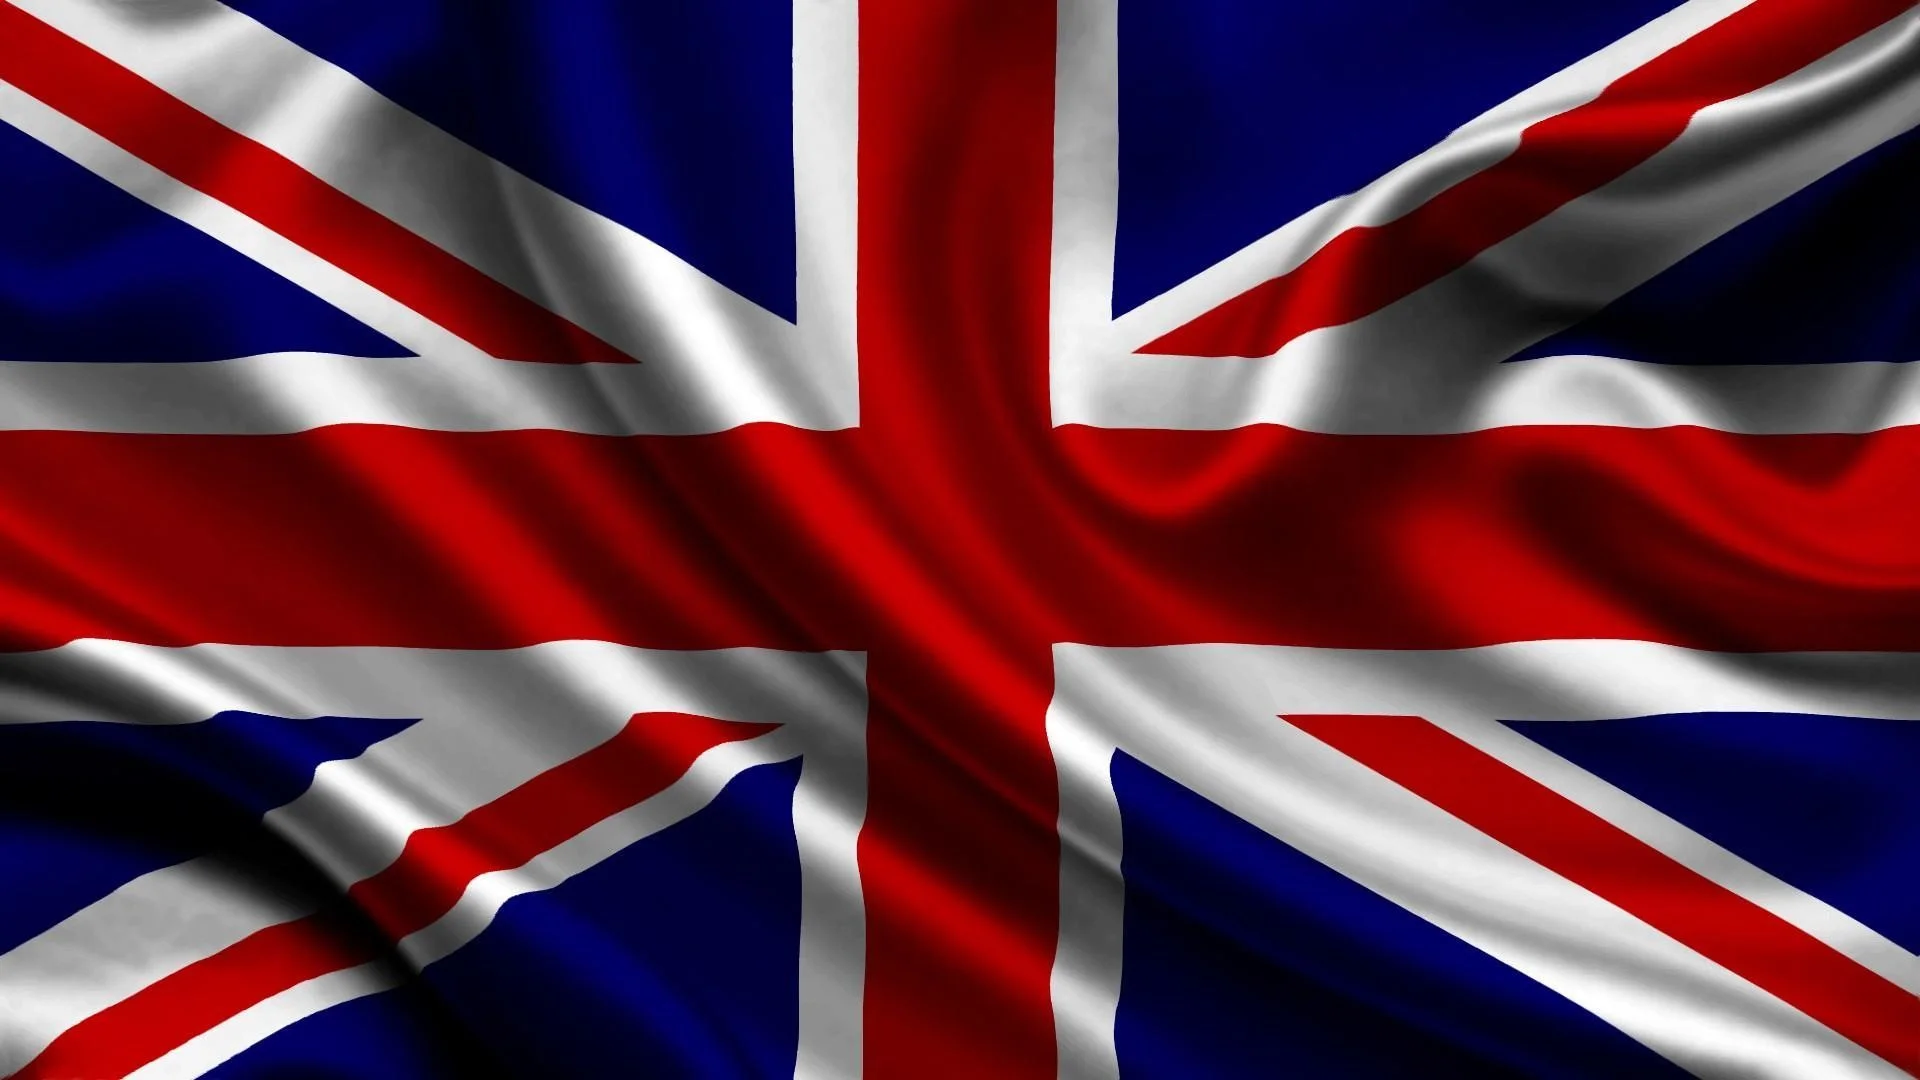 Flag Wallpapers Backgrounds – Download free Flag British Flag wal